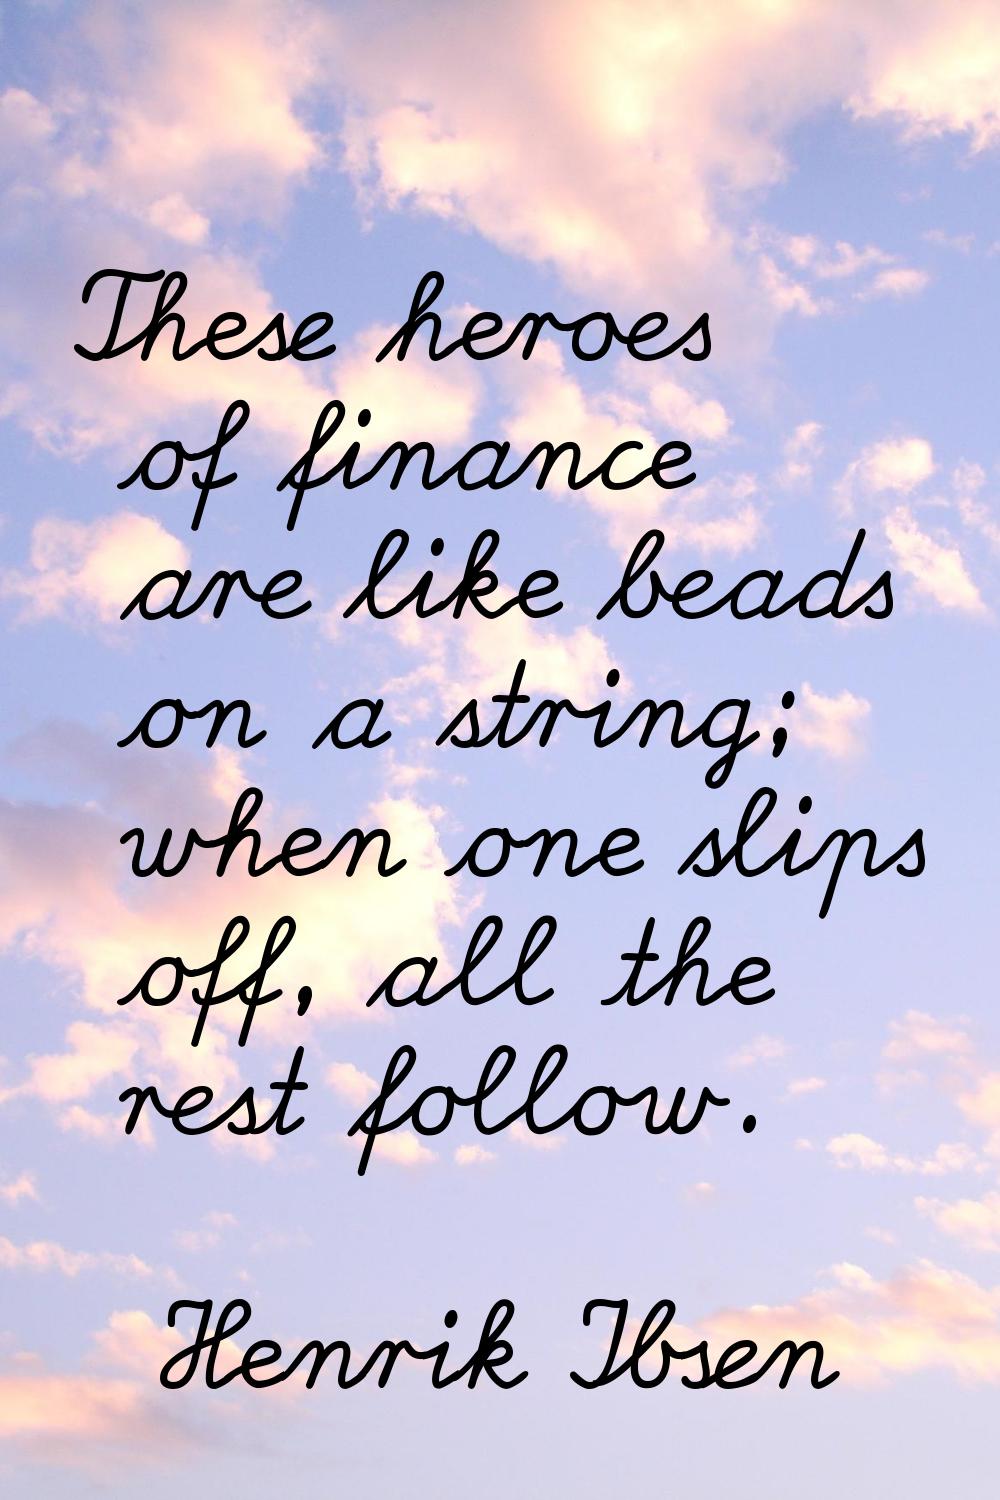 These heroes of finance are like beads on a string; when one slips off, all the rest follow.